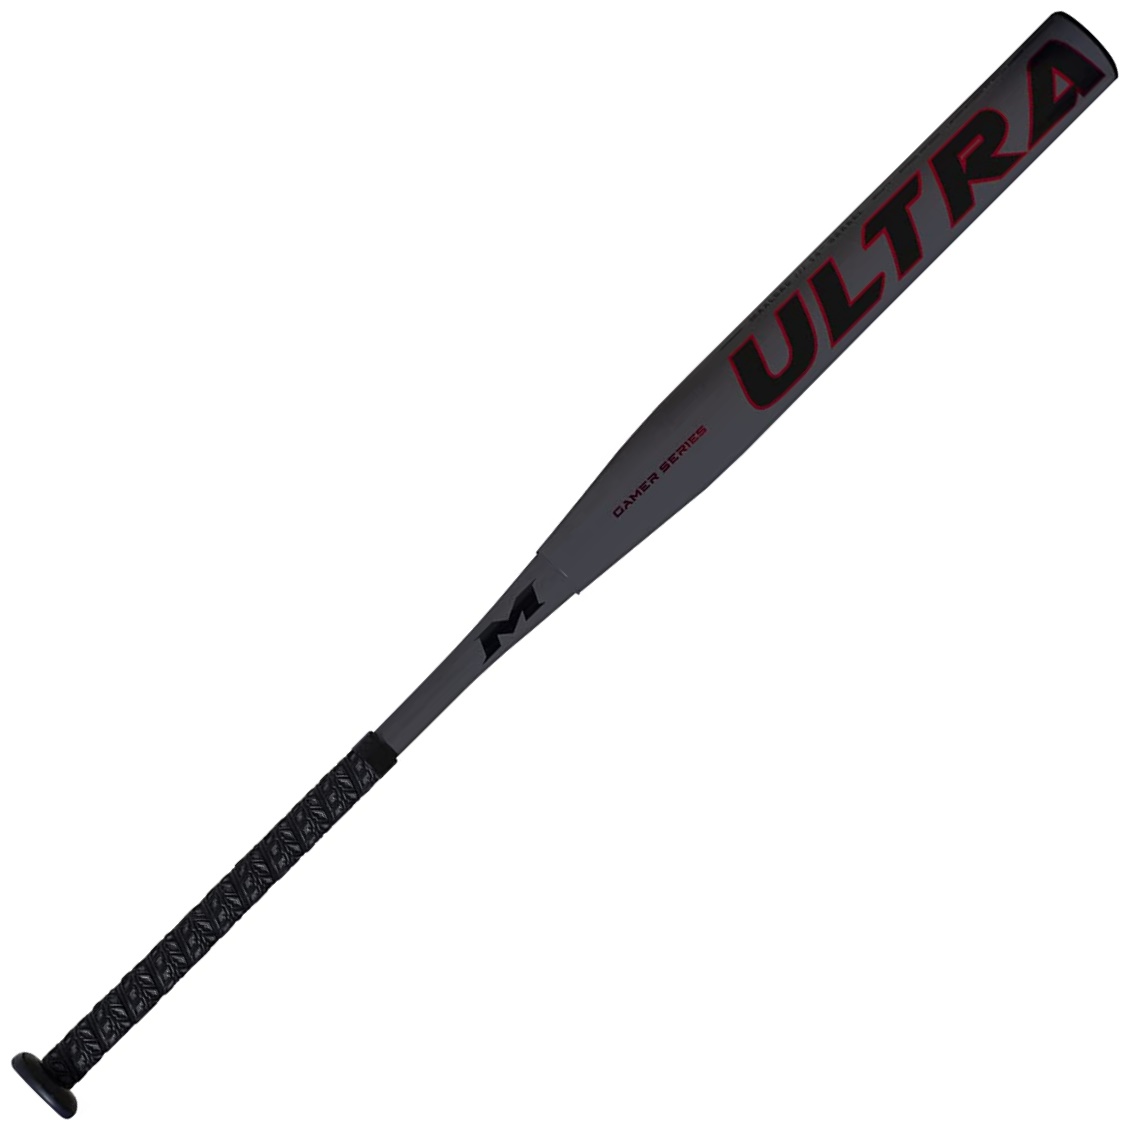 miken-ultra-gamer-series-two-piece-maxload-14-barrel-ssusa-slowpitch-softball-bat-34-inch-27-oz MUL21S-3-27   The New Miken Ultra Gamer Series offers one of the largest